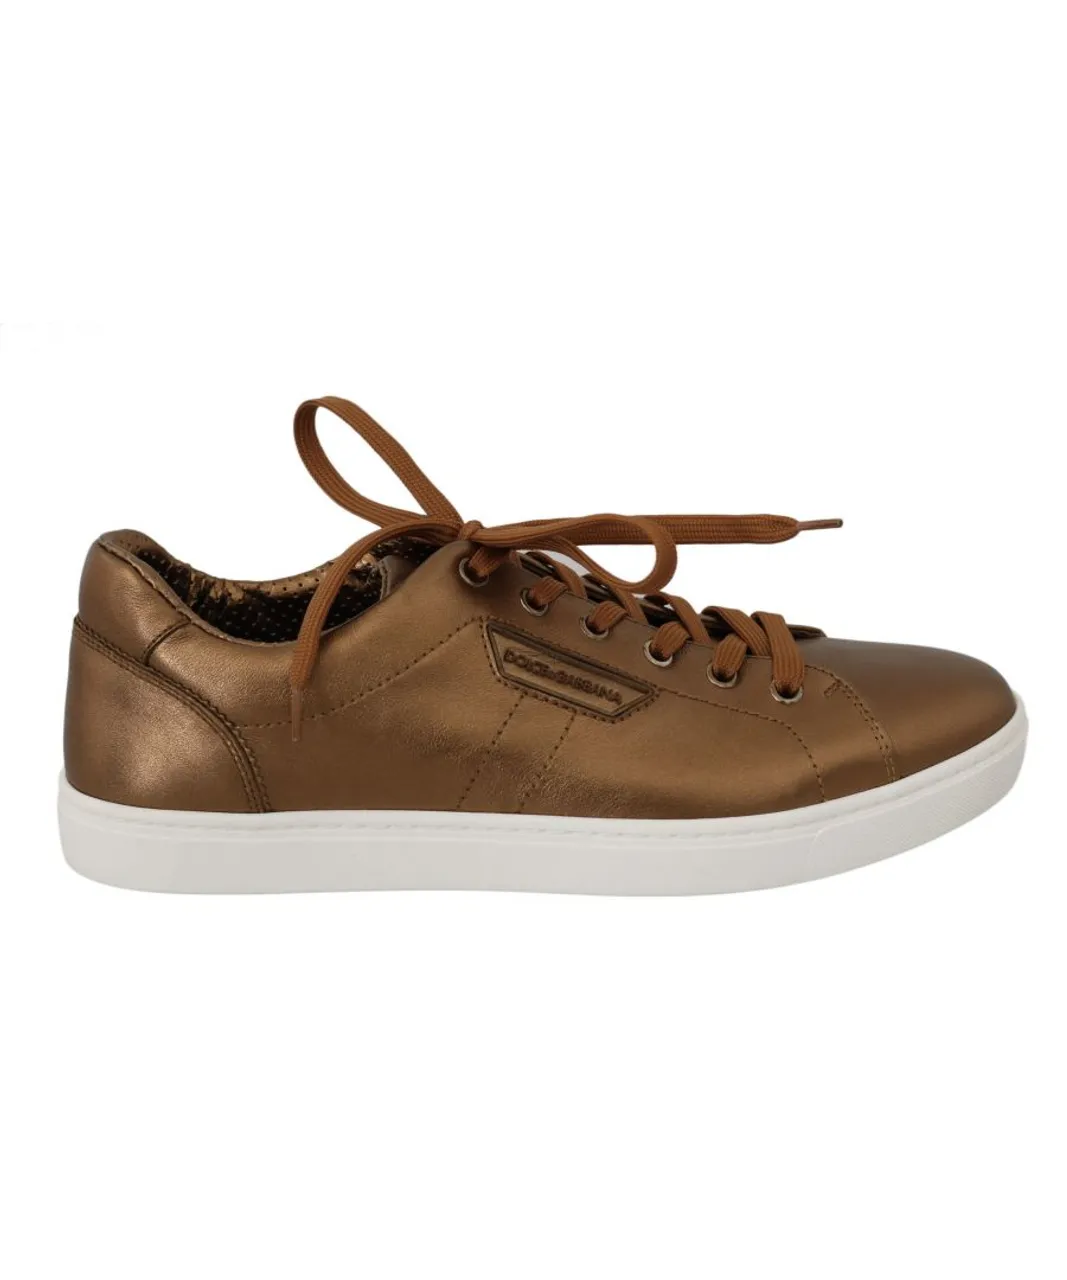 Dolce & Gabbana Gold Leather Mens Casual Sneakers - Black